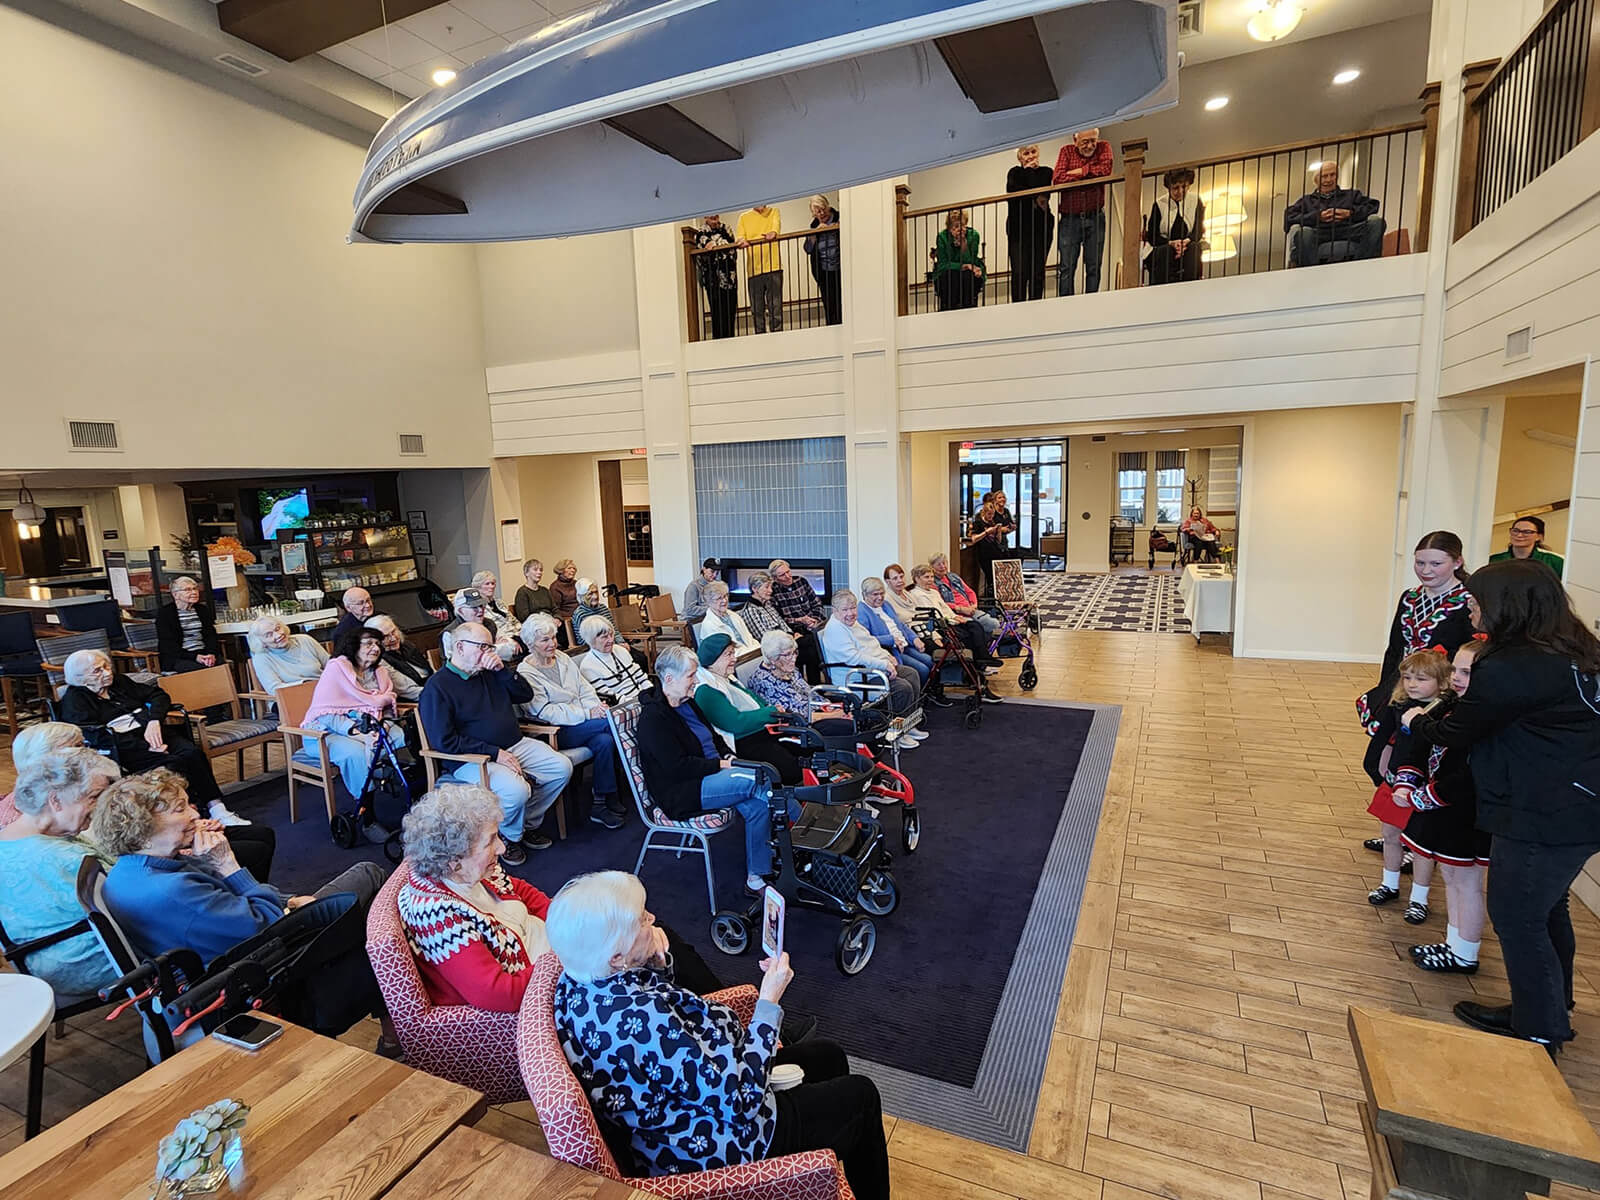 Residents of The Waters of Excelsior enjoy a live musical performance in the spacious community lounge, illustrating the active social life at the residence.